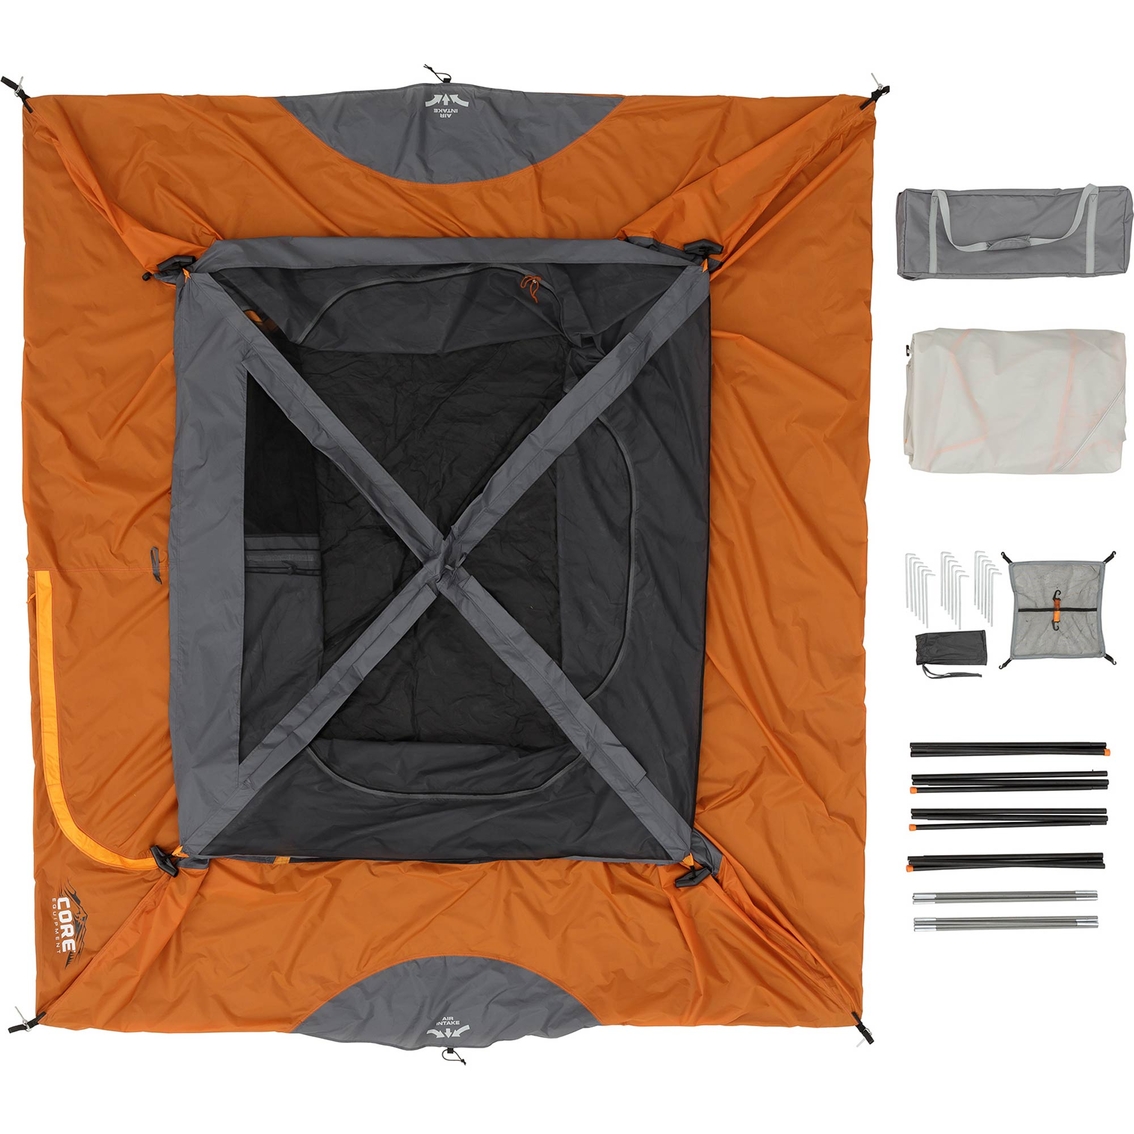 Core Equipment 6 Person Straight Wall Cabin Tent - Image 3 of 10